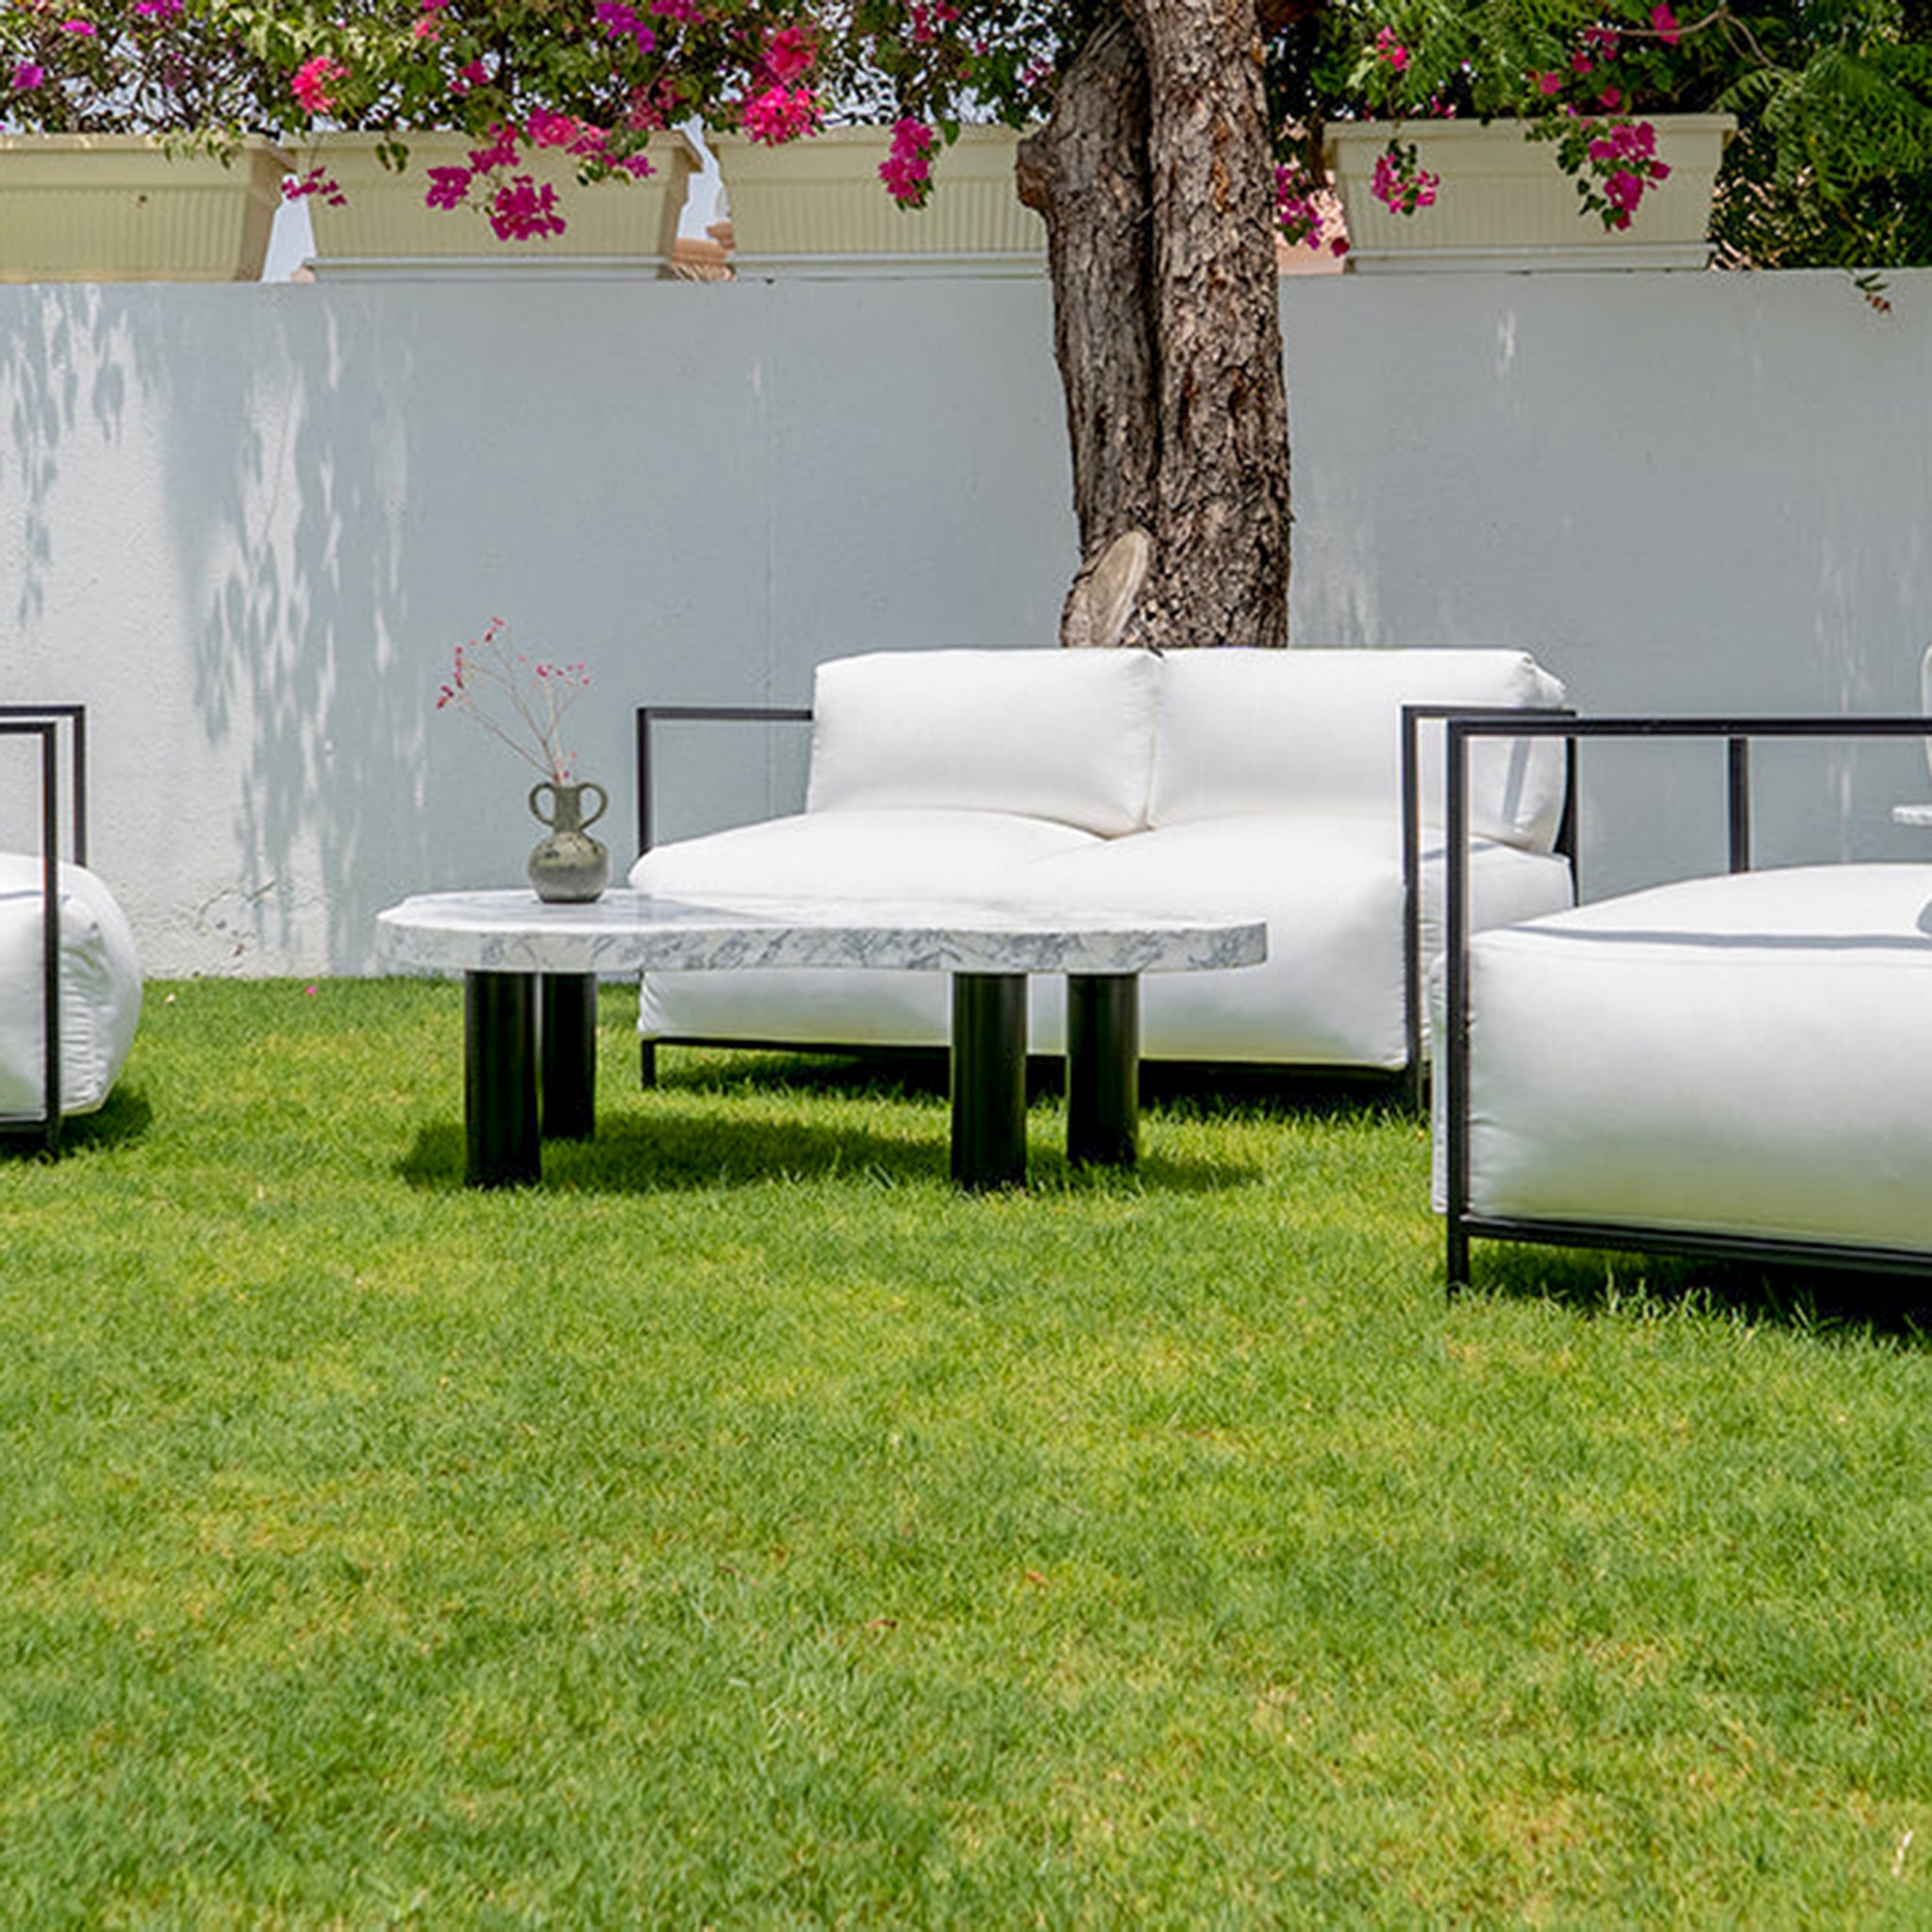 Relax in style on the Dexter, a modern three-seater outdoor sofa perfect for creating a comfortable patio retreat.